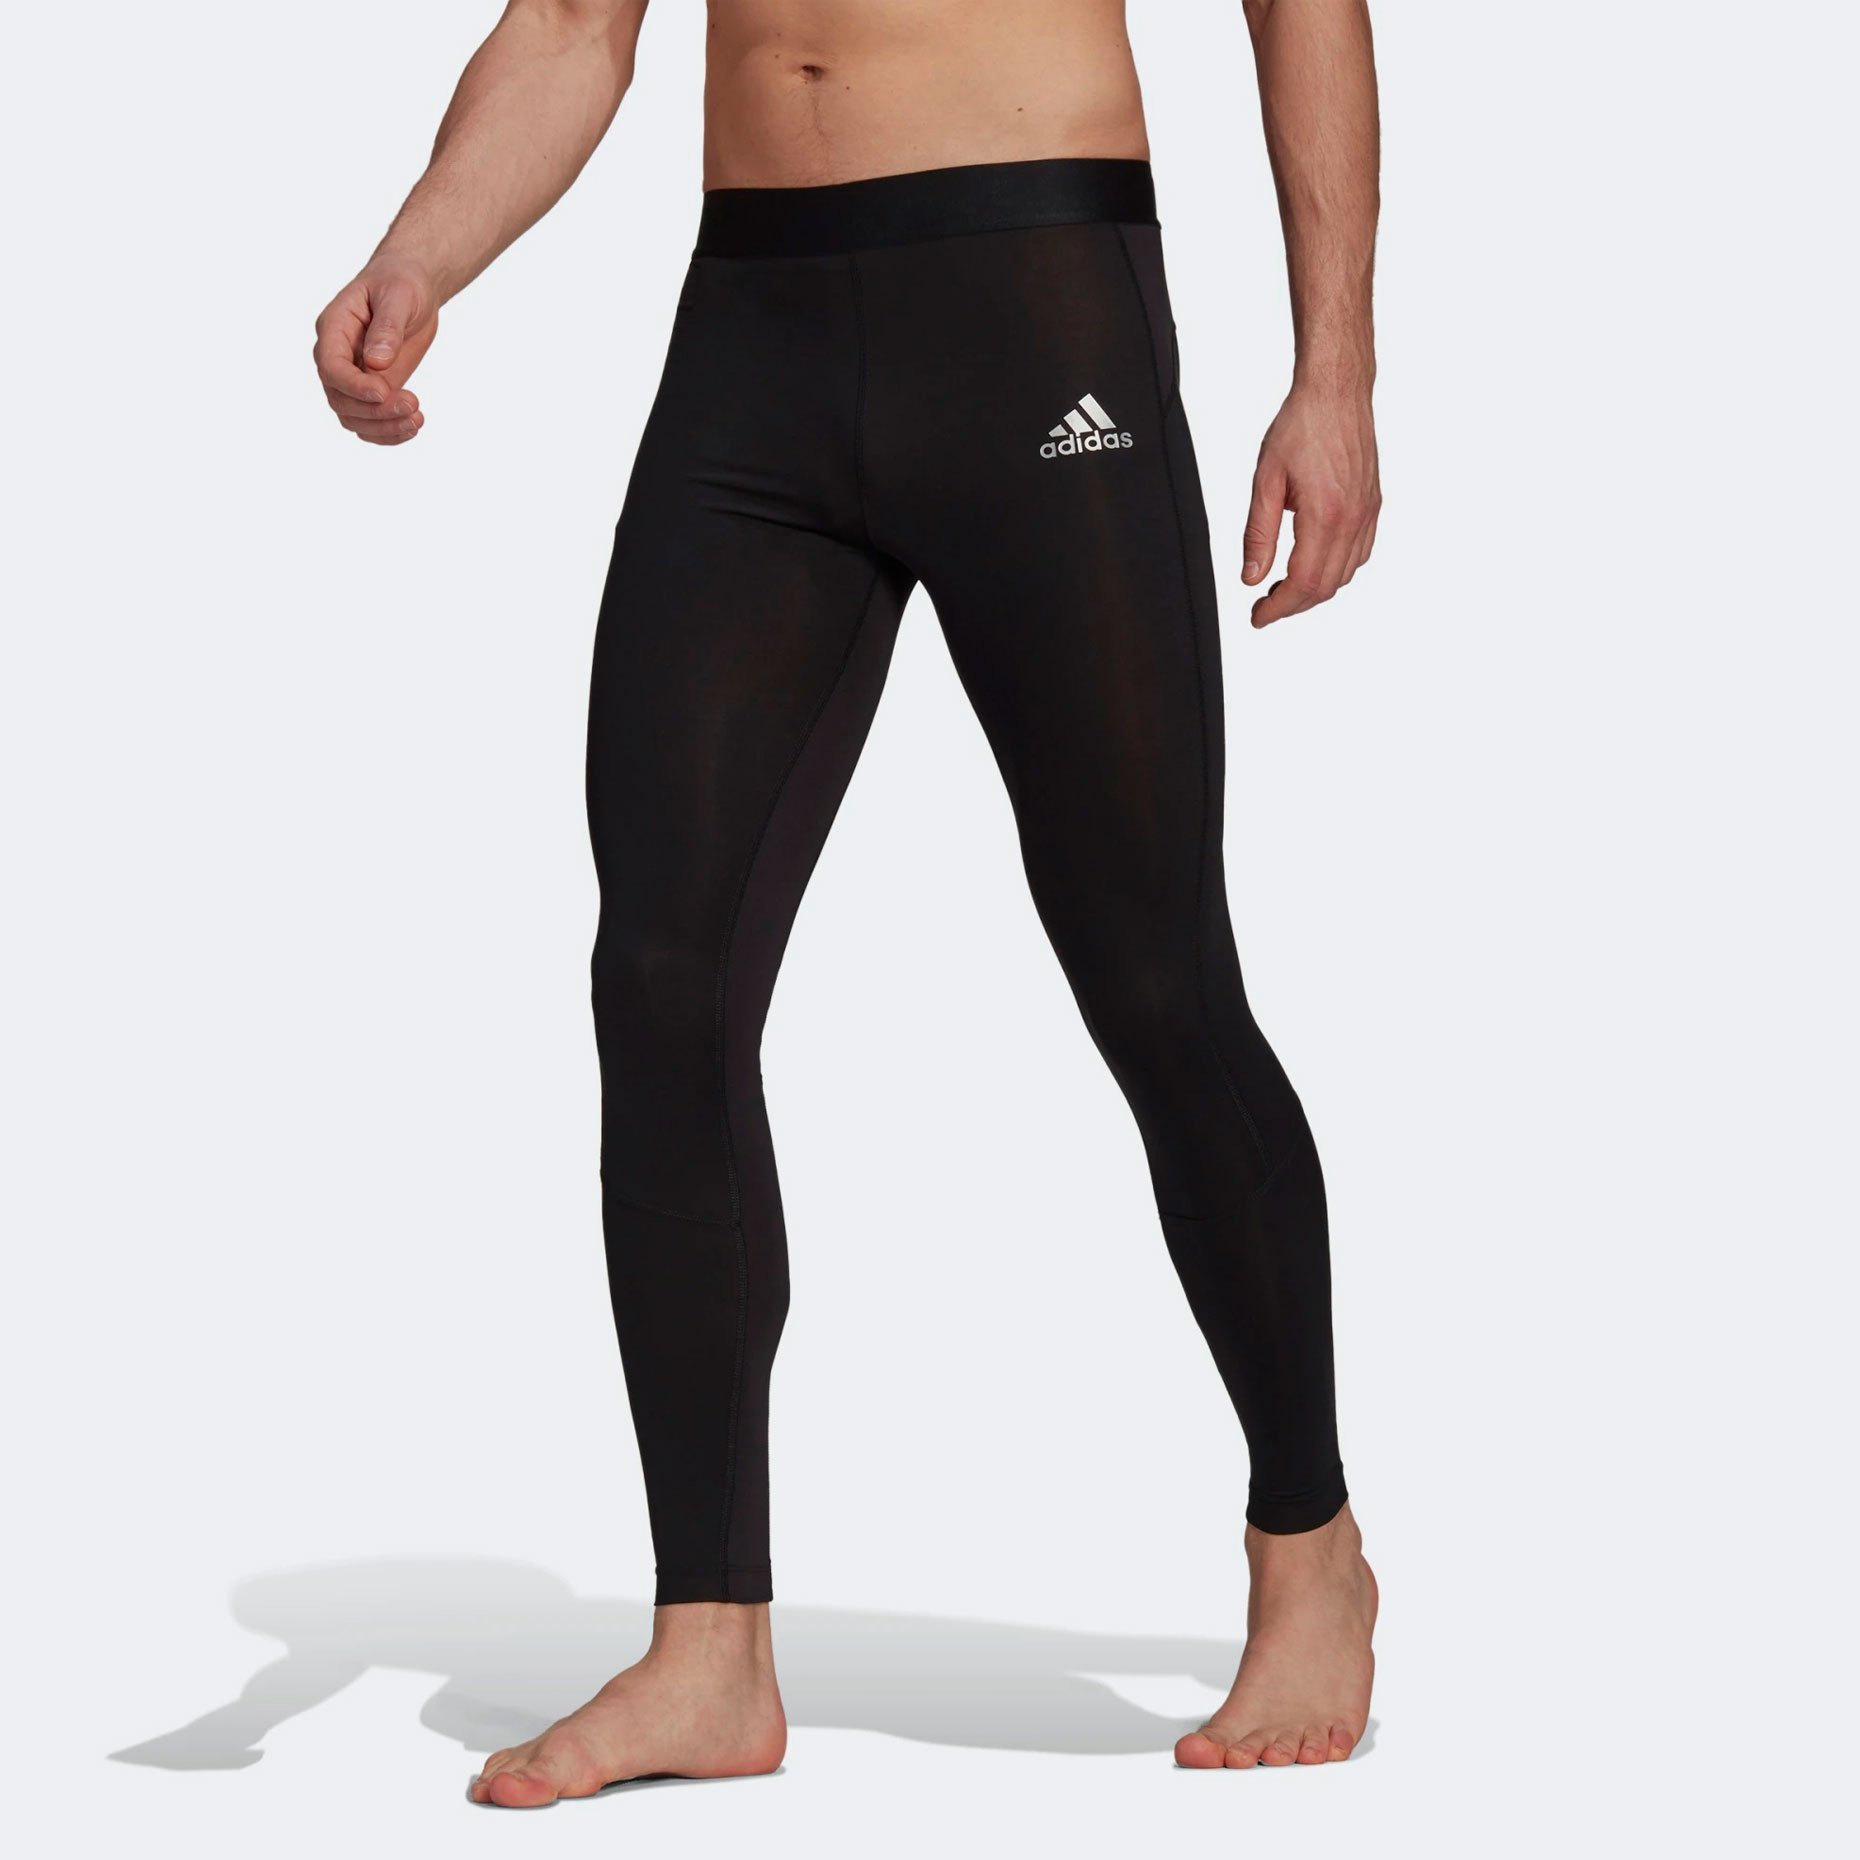  adidas Men's Techfit Long Tights, White, Small : Clothing,  Shoes & Jewelry